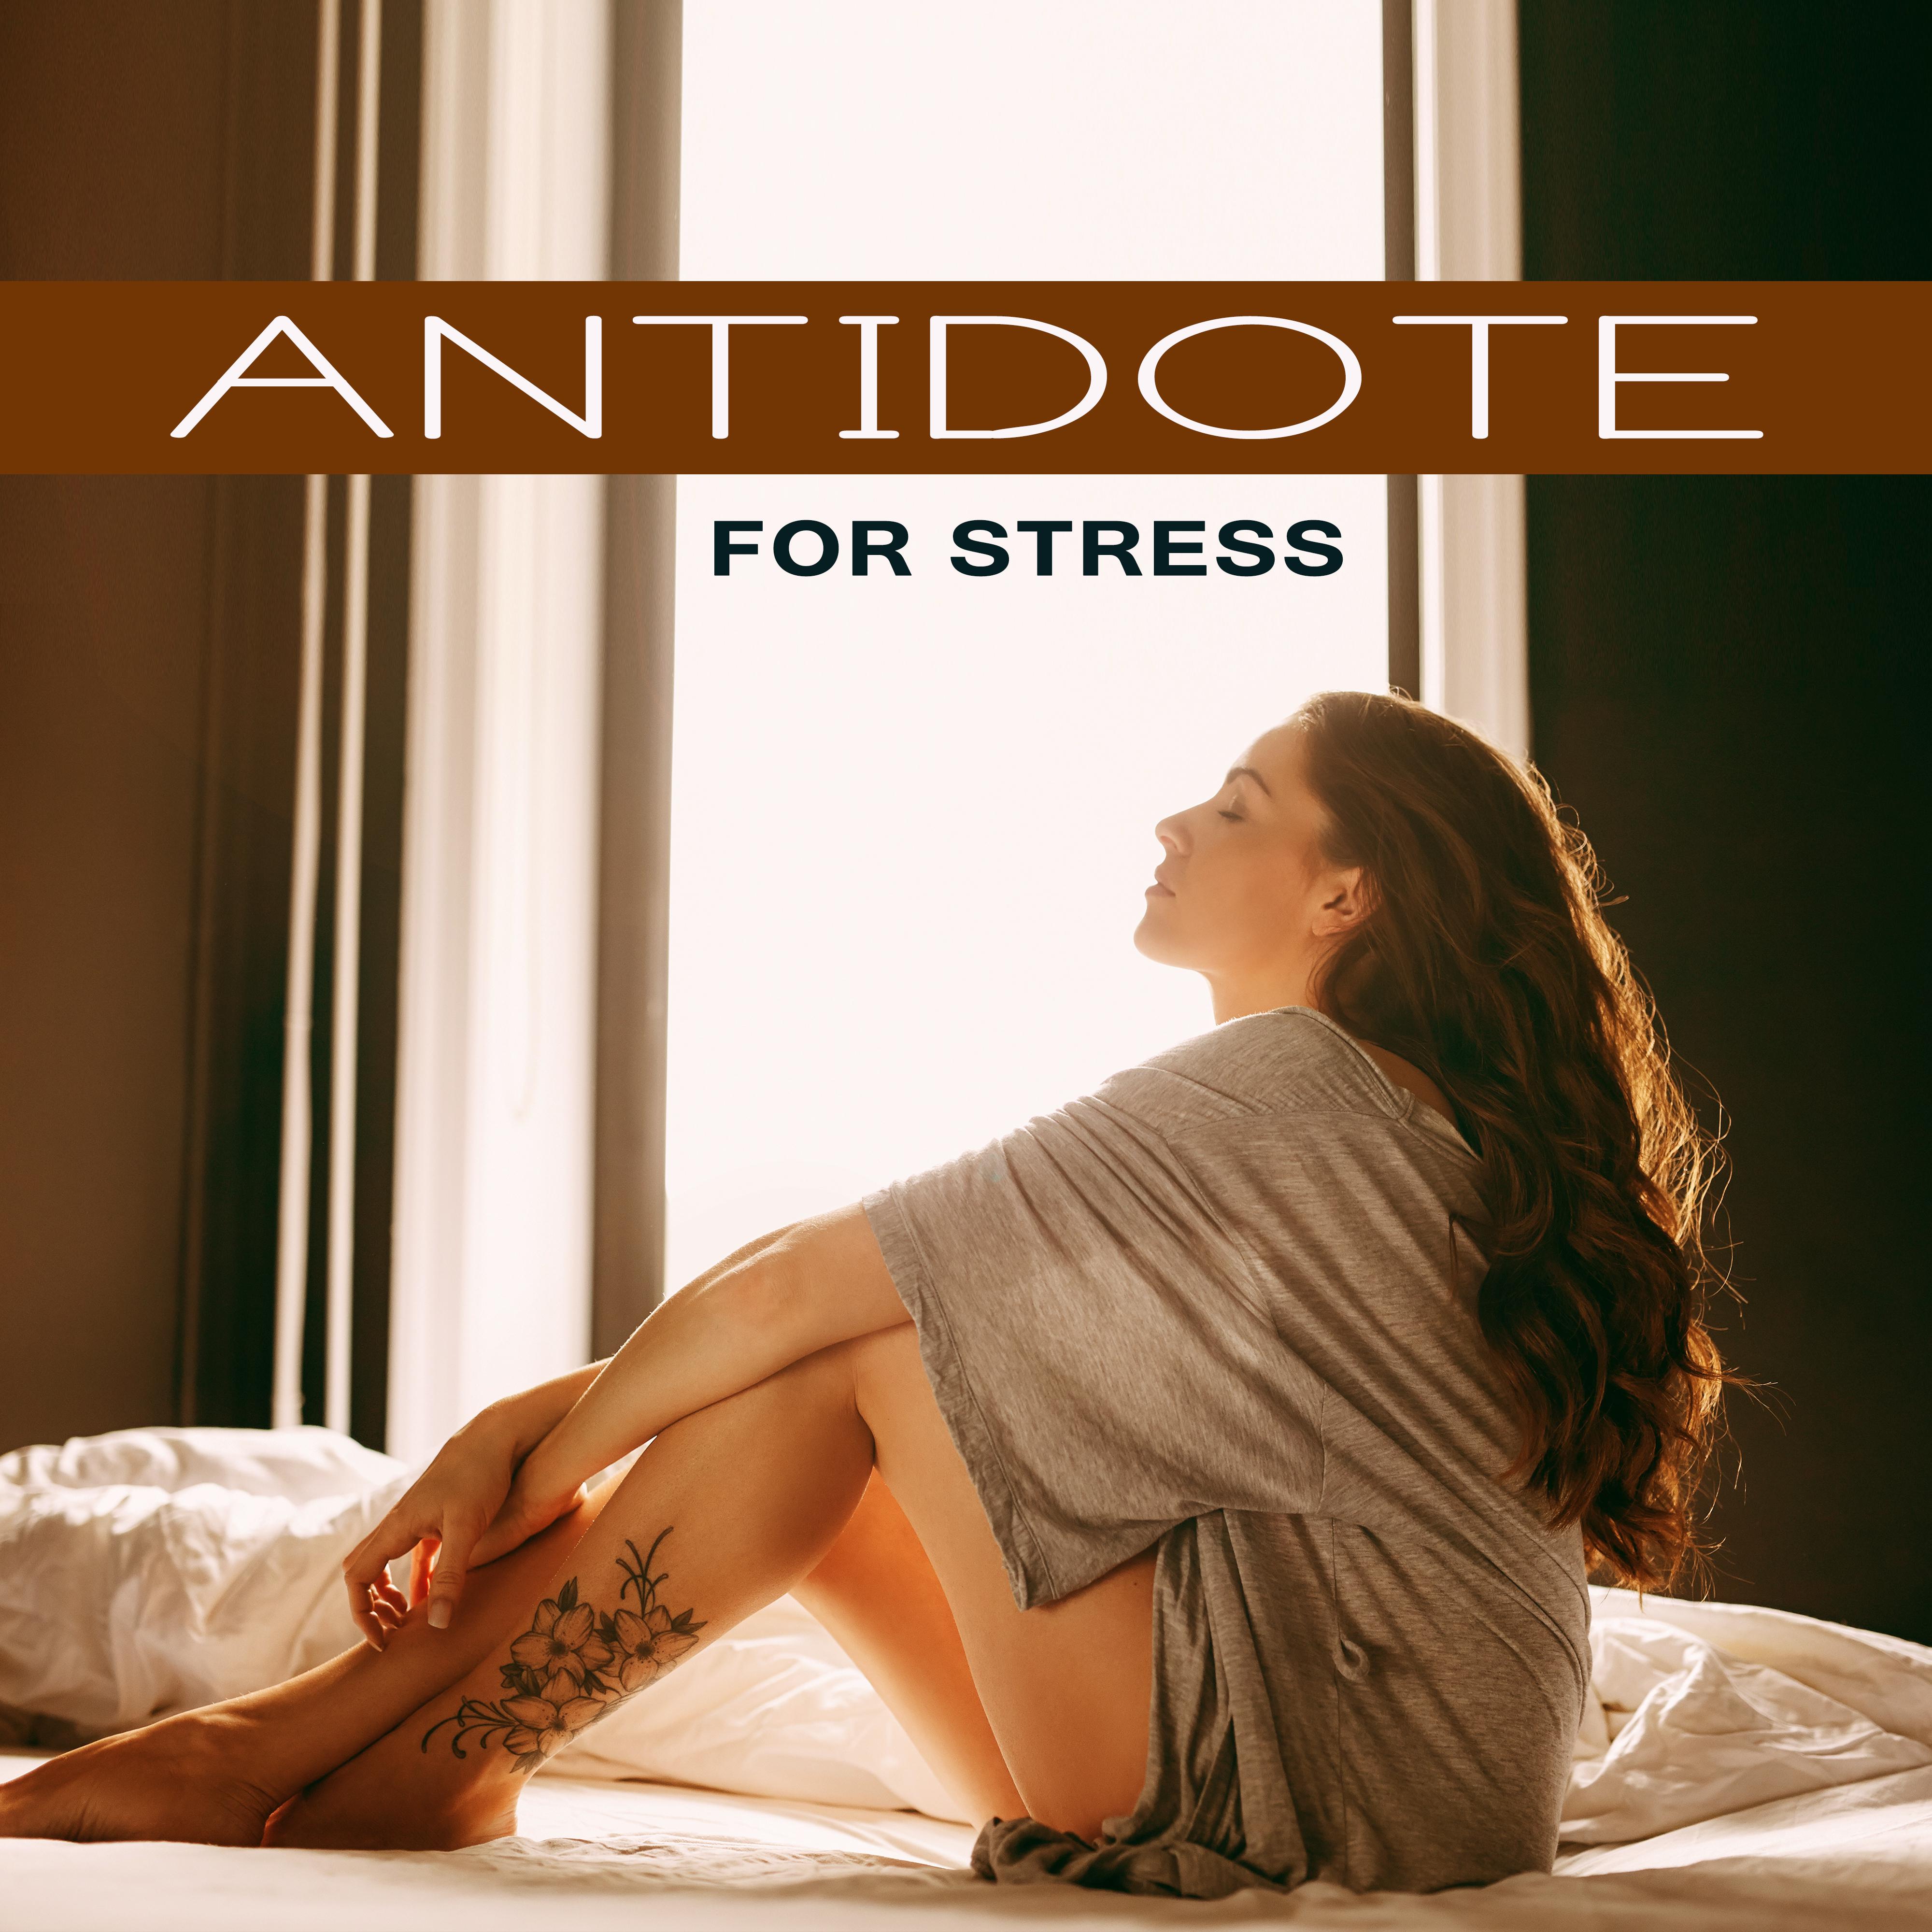 Antidote for Stress – Relaxing Music, Relief Stress, Antidepressant Songs, Calming Nature Sounds